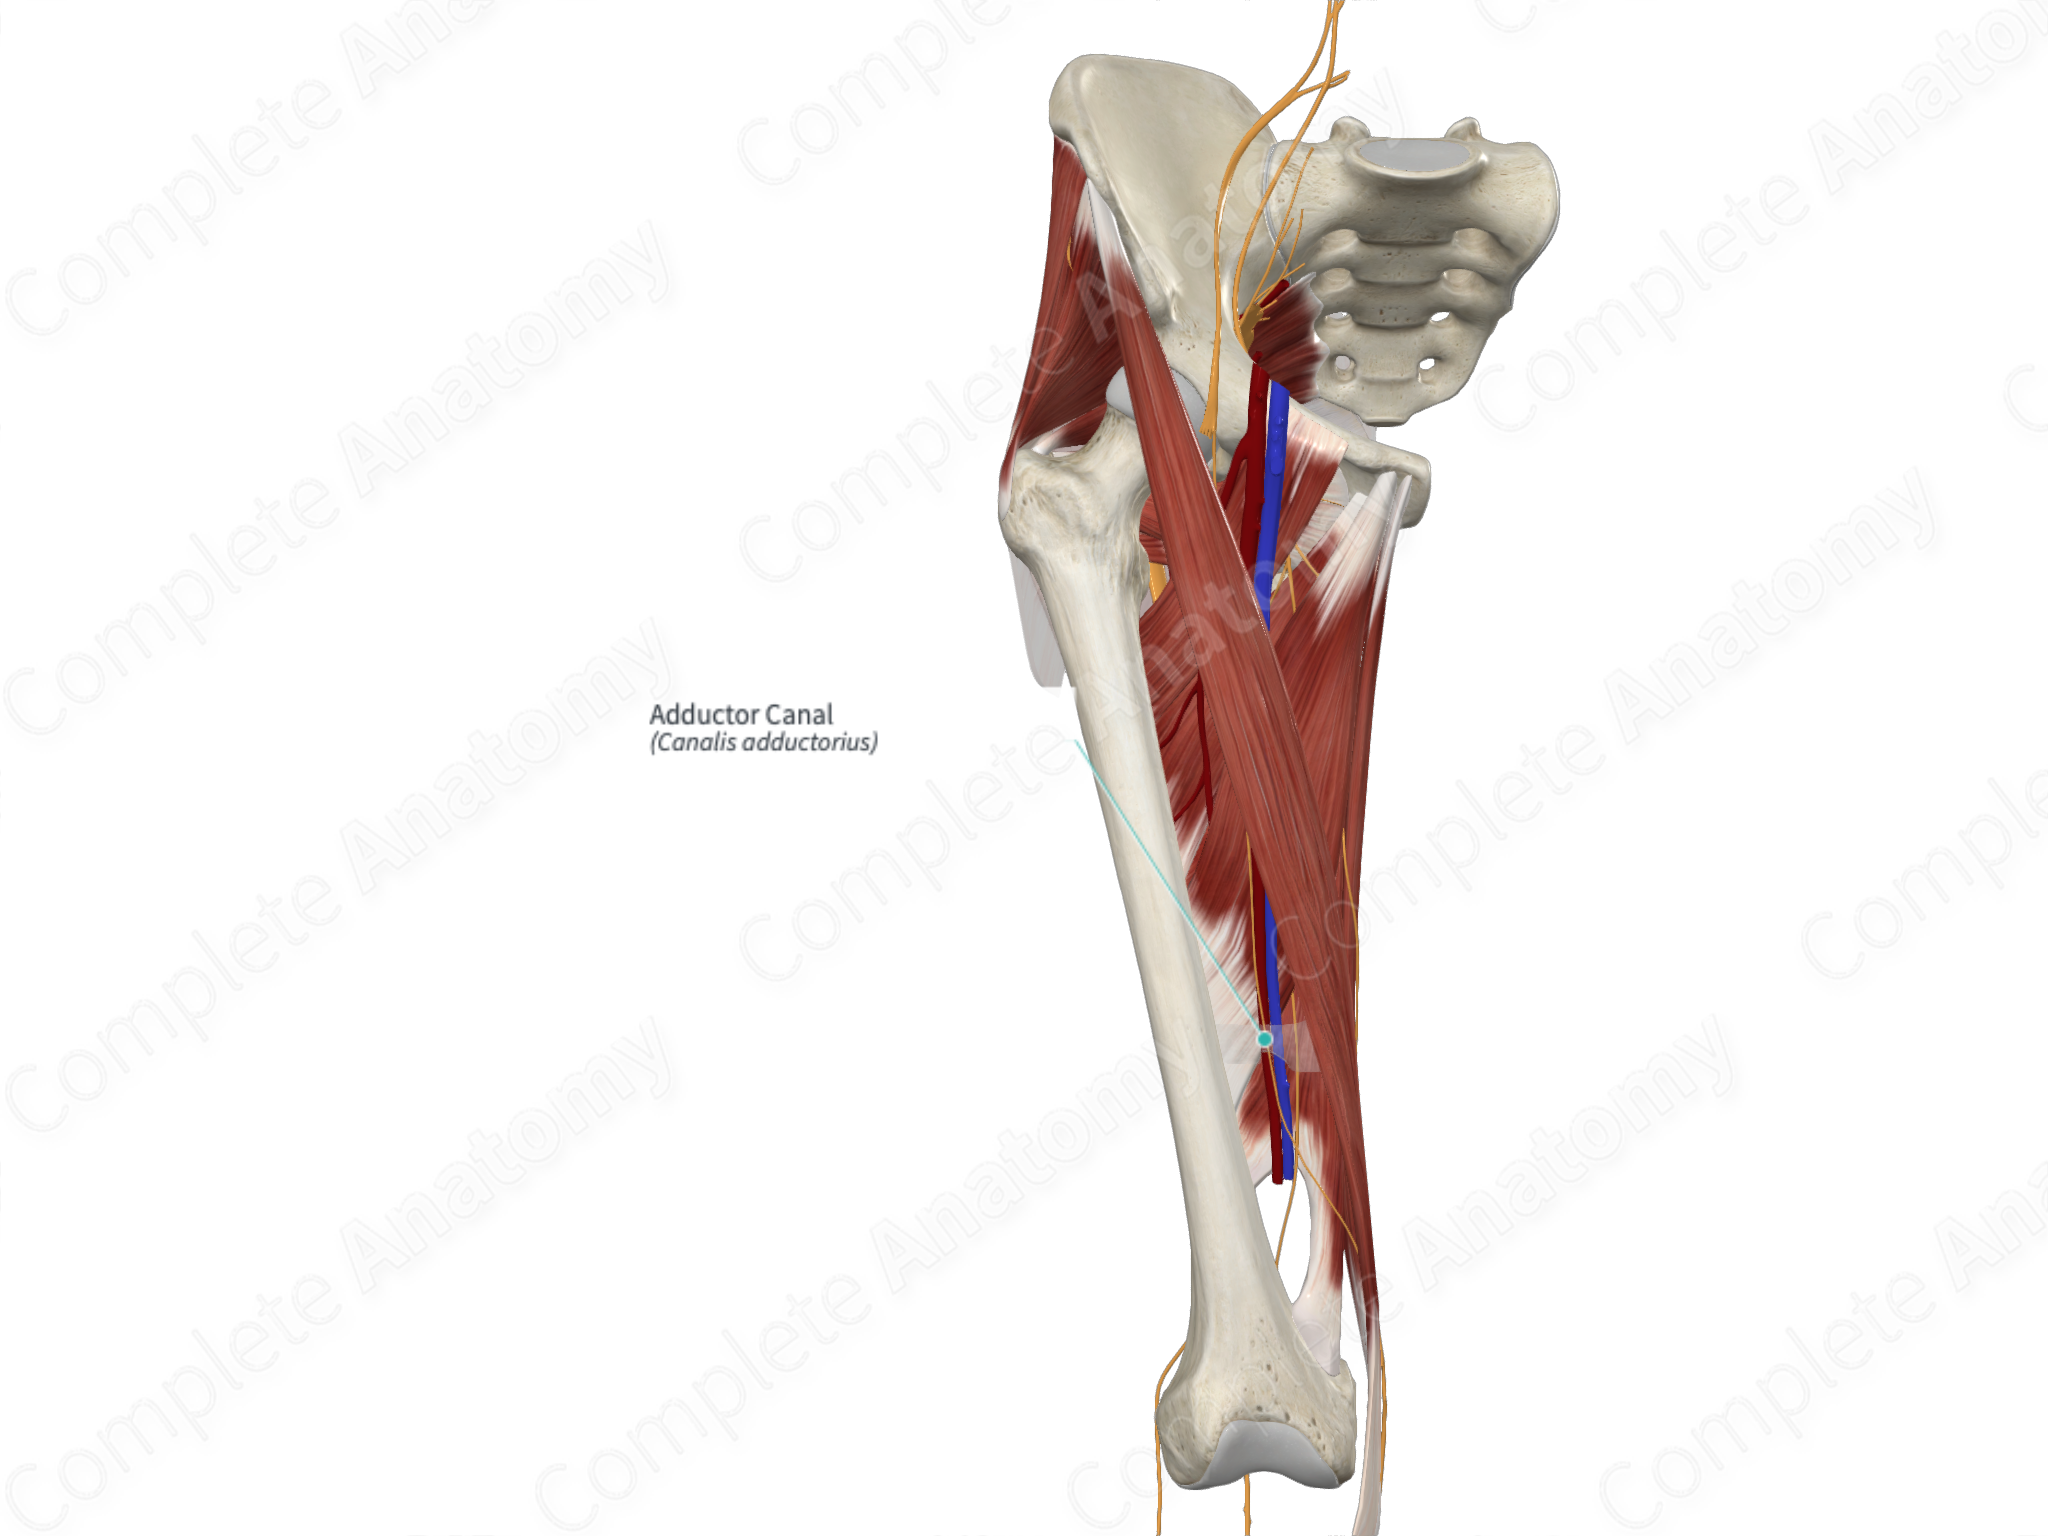 Adductor Canal Anatomy, 3D Anatomy of Hunter's canal